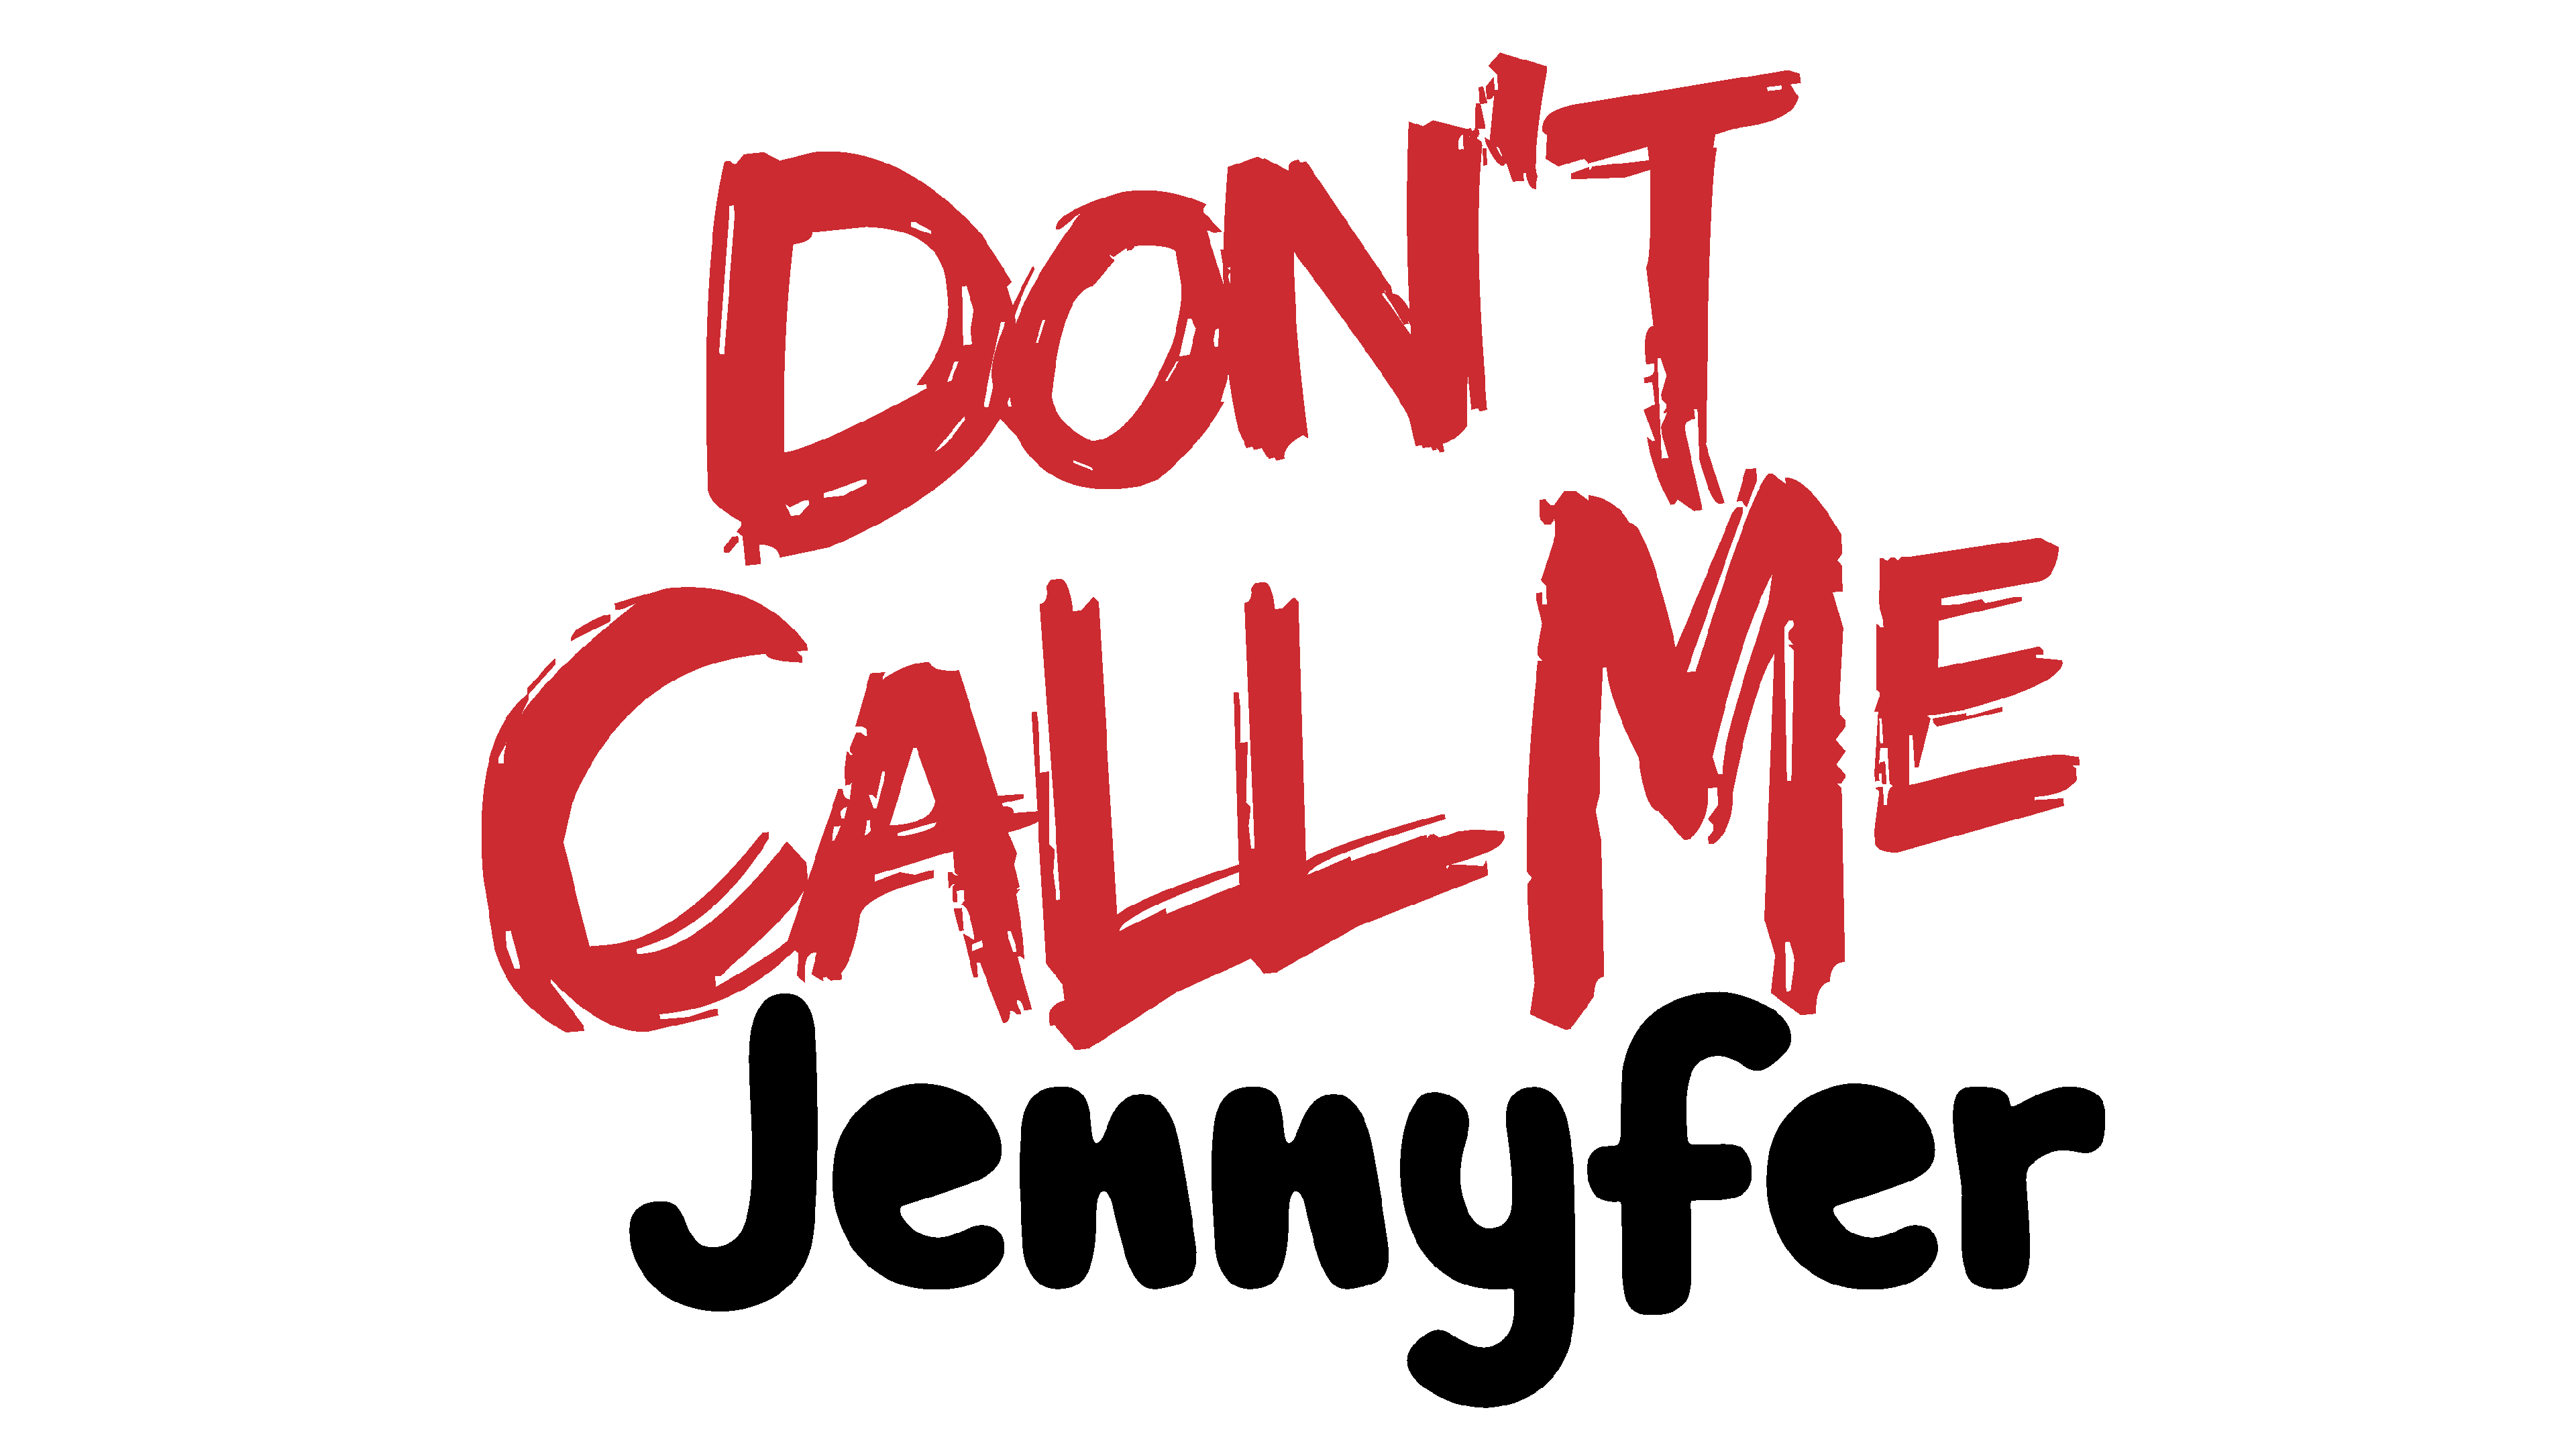 Dont que. Dont Call me Jennyfer. Dont Call me Jennyfer бренд. Dont Call me Jennifer одежда. Don't Call me Jennifer платья.